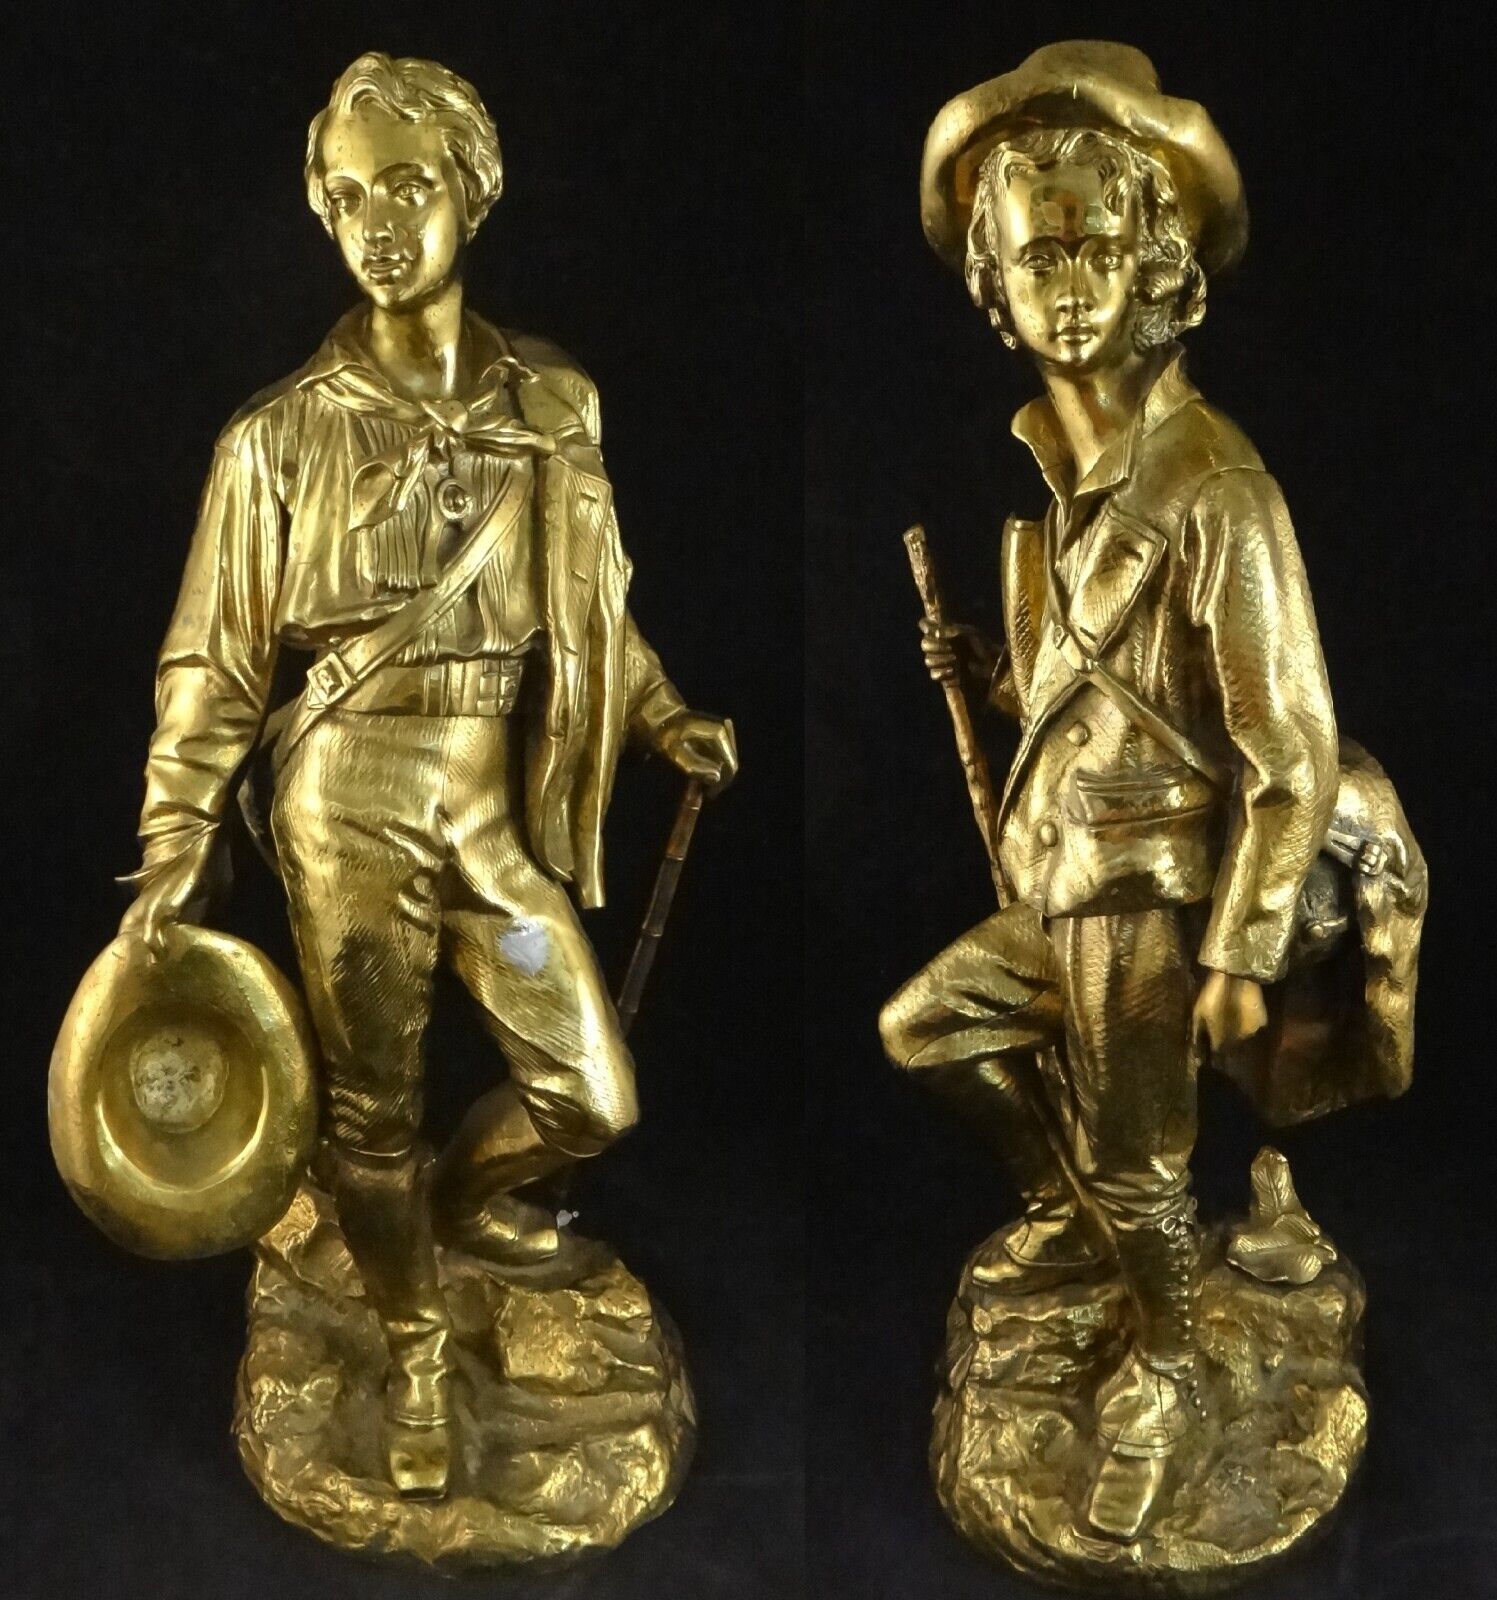 Pr.French Emile-Victor Blavier Bronze Figures w/Gold Finish. 15 ½” & 15 ¼” tall.